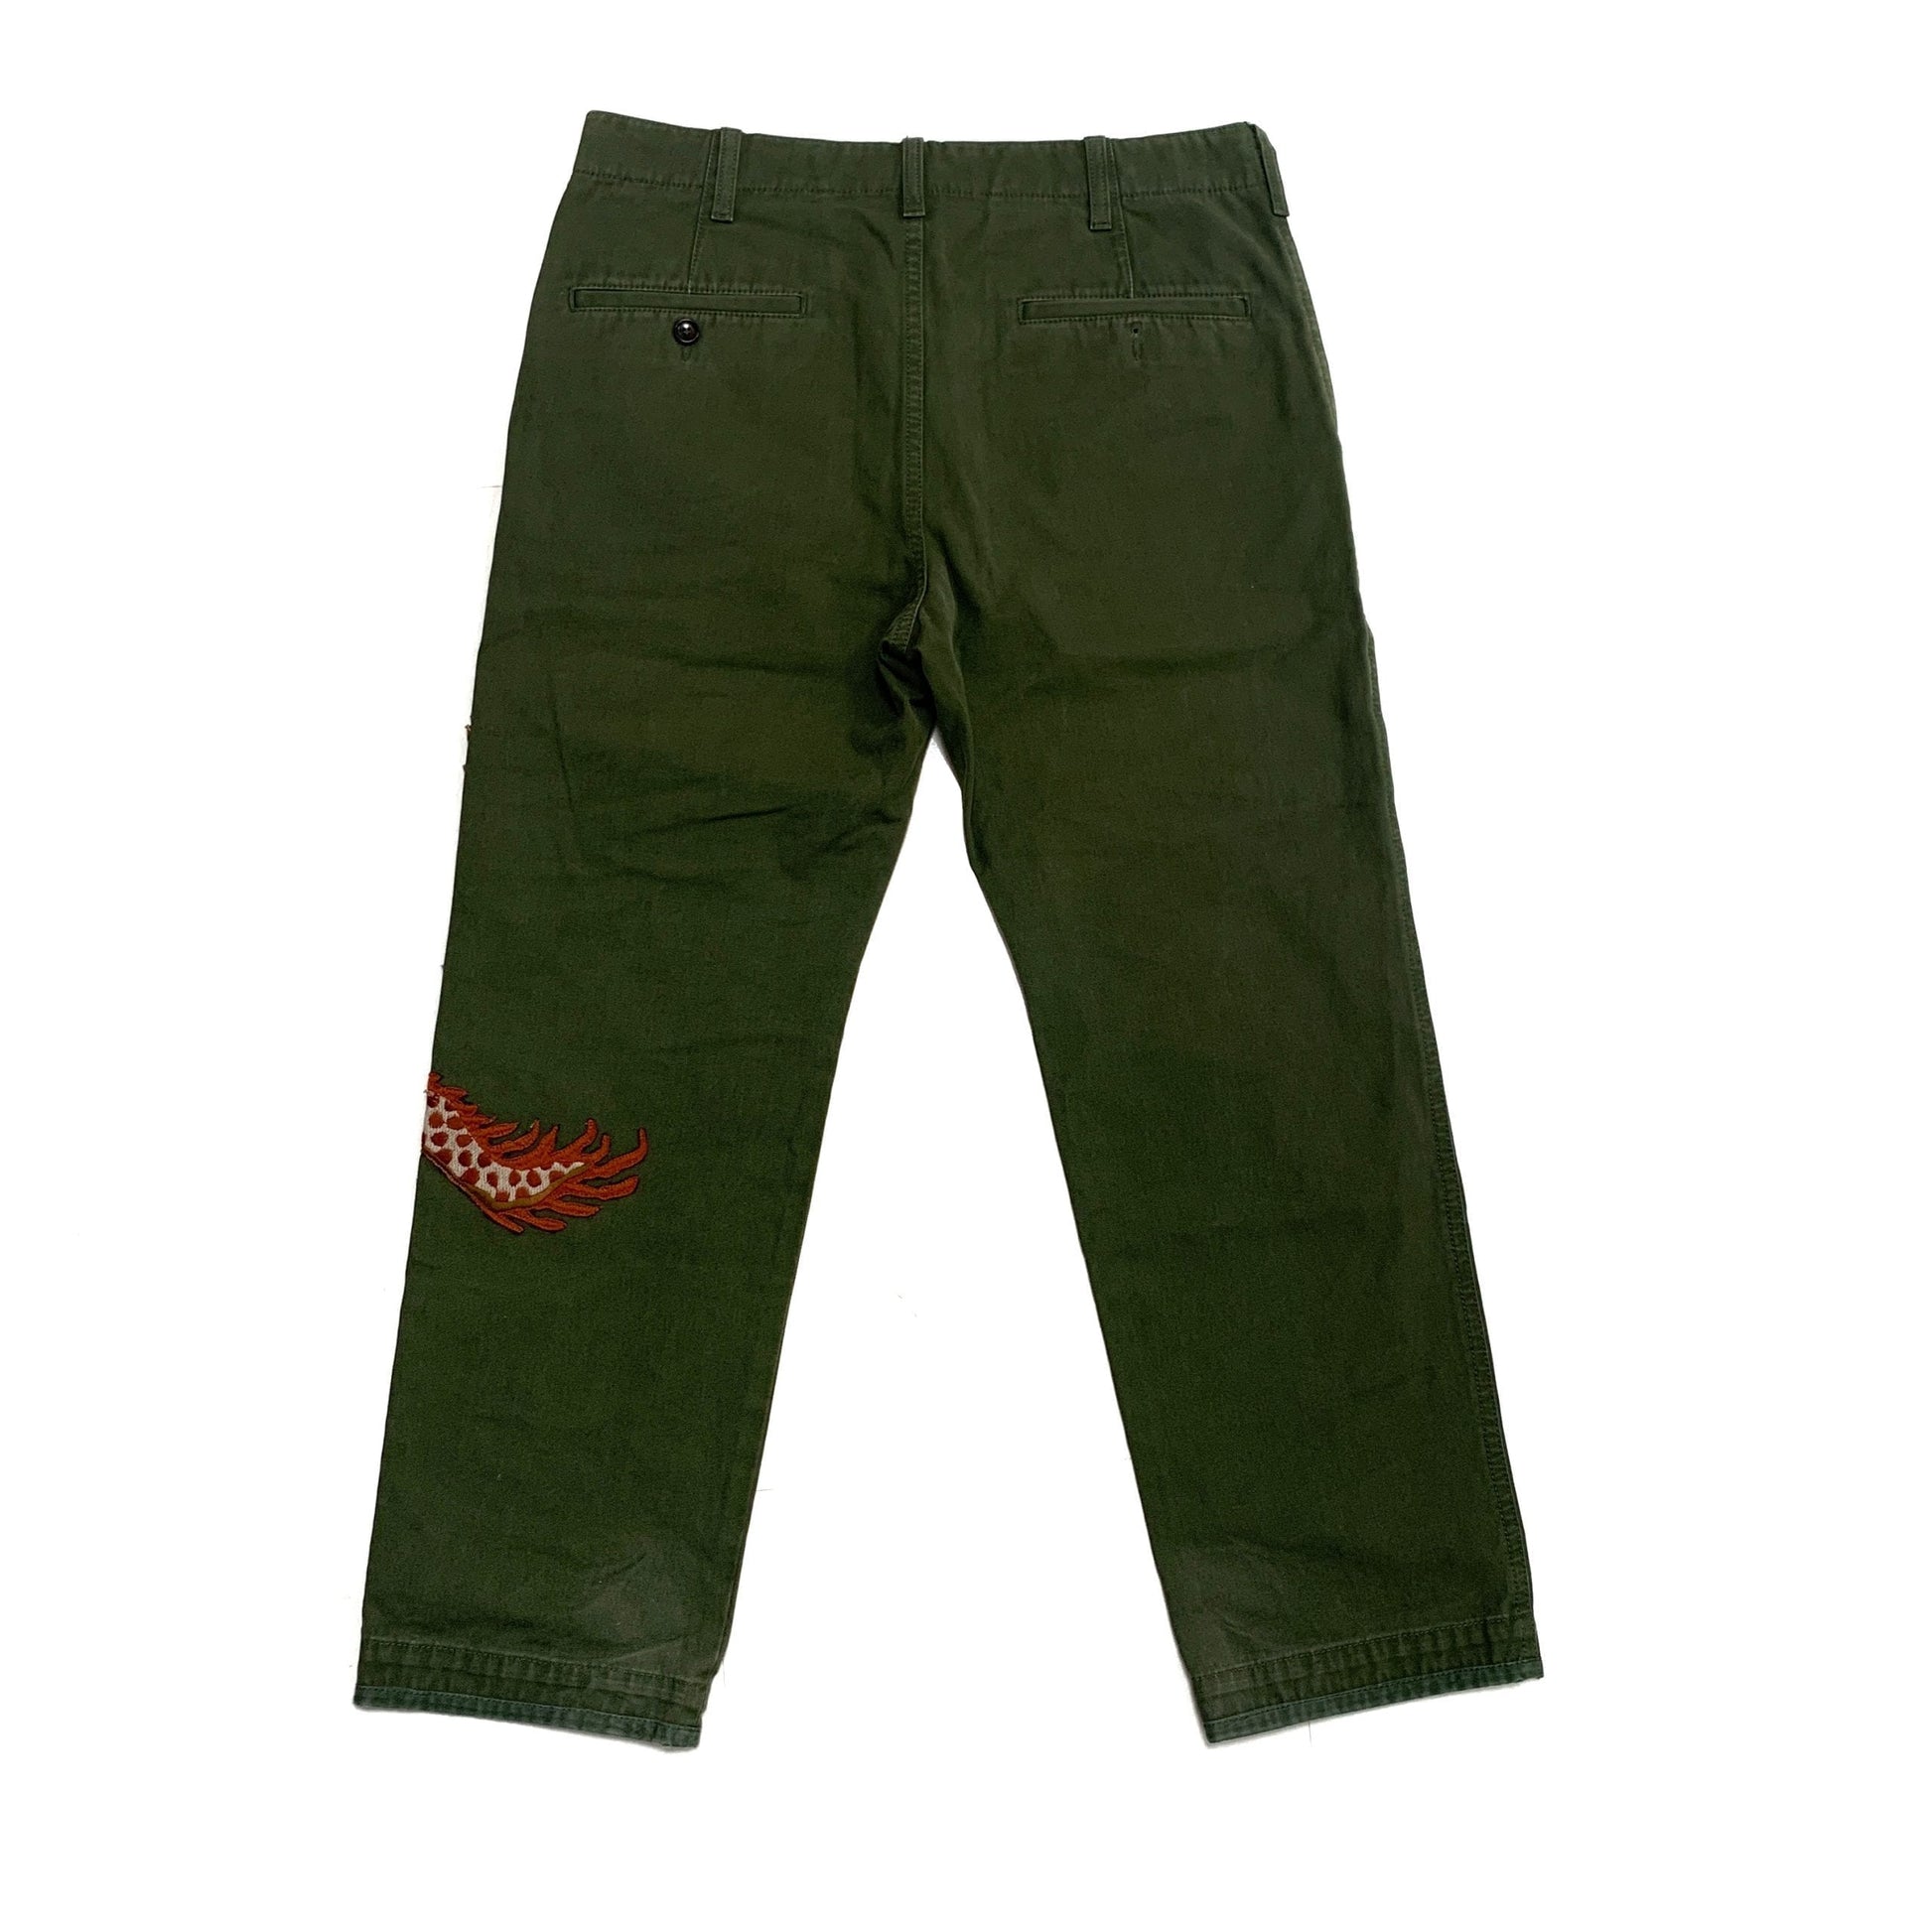 Gucci Military Embroided Dragon Trousers Gucci